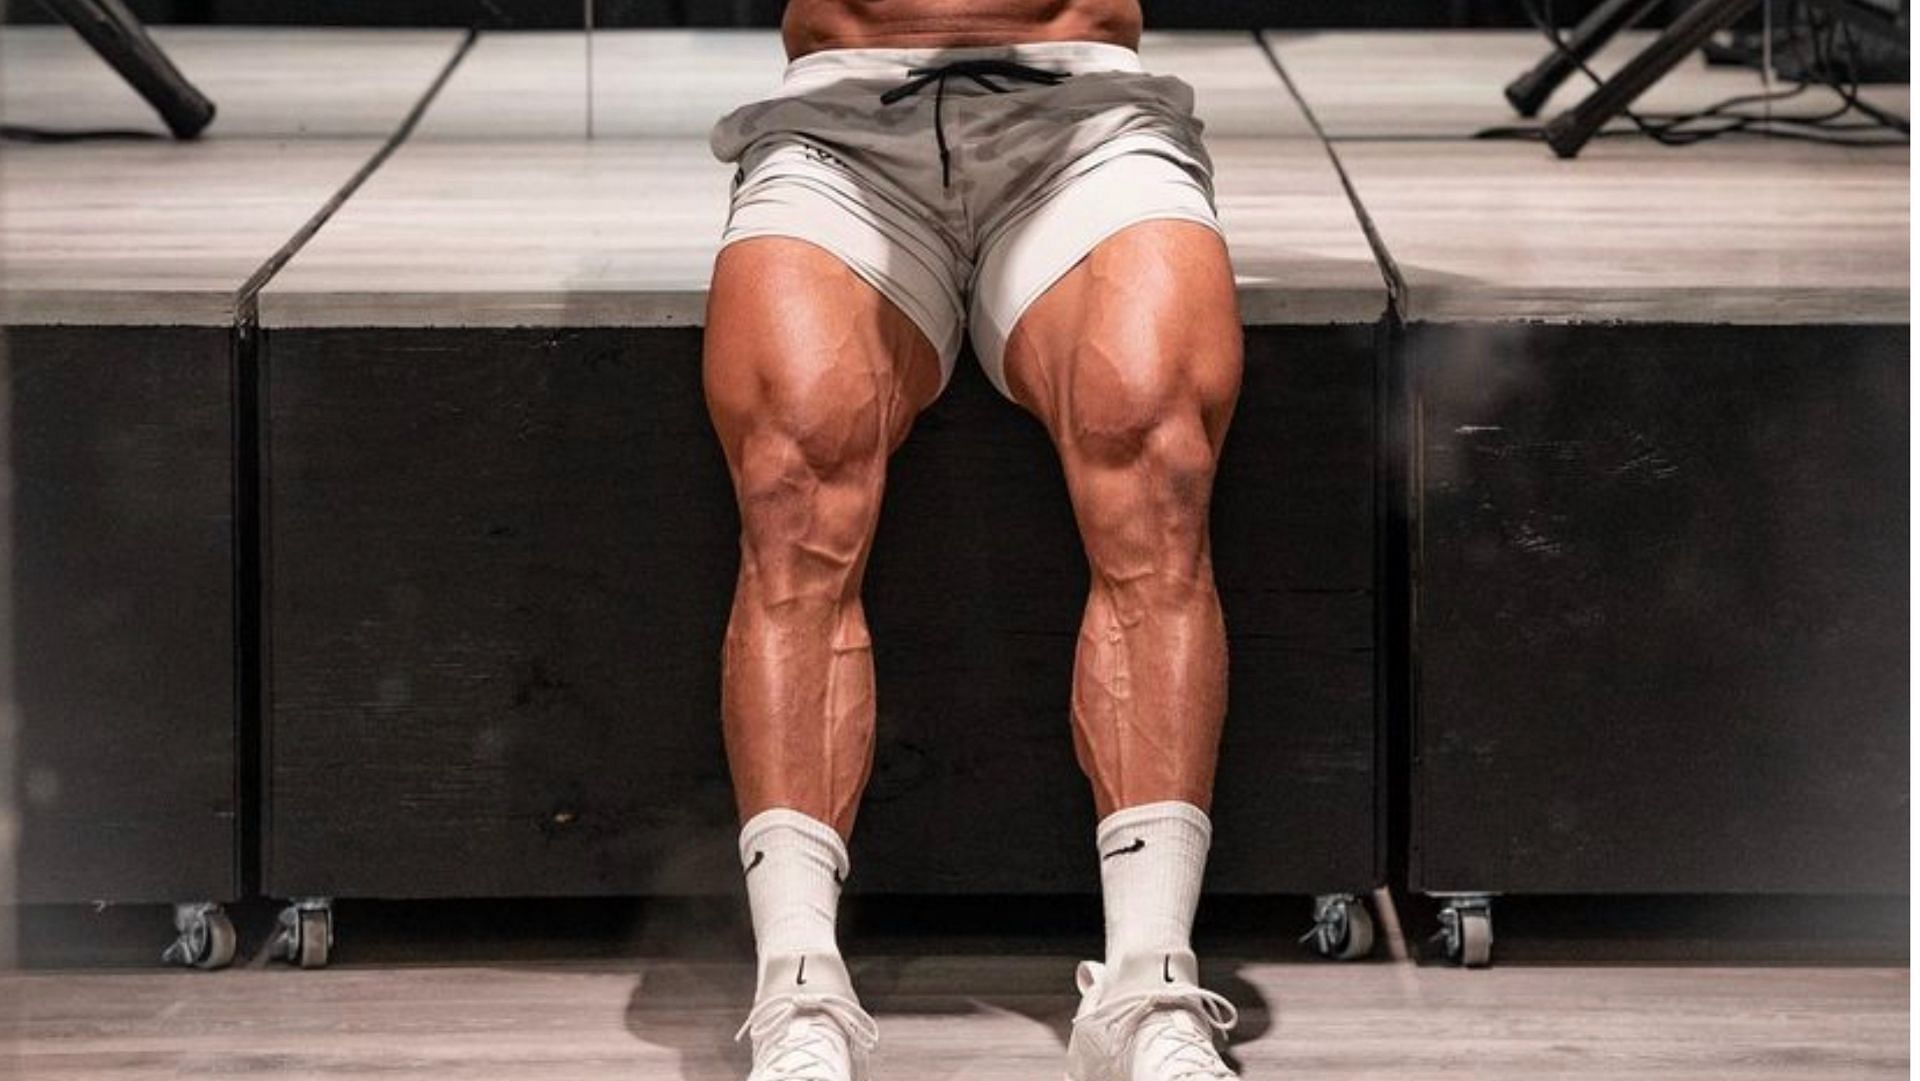 The Top 5 Best Calf Exercises